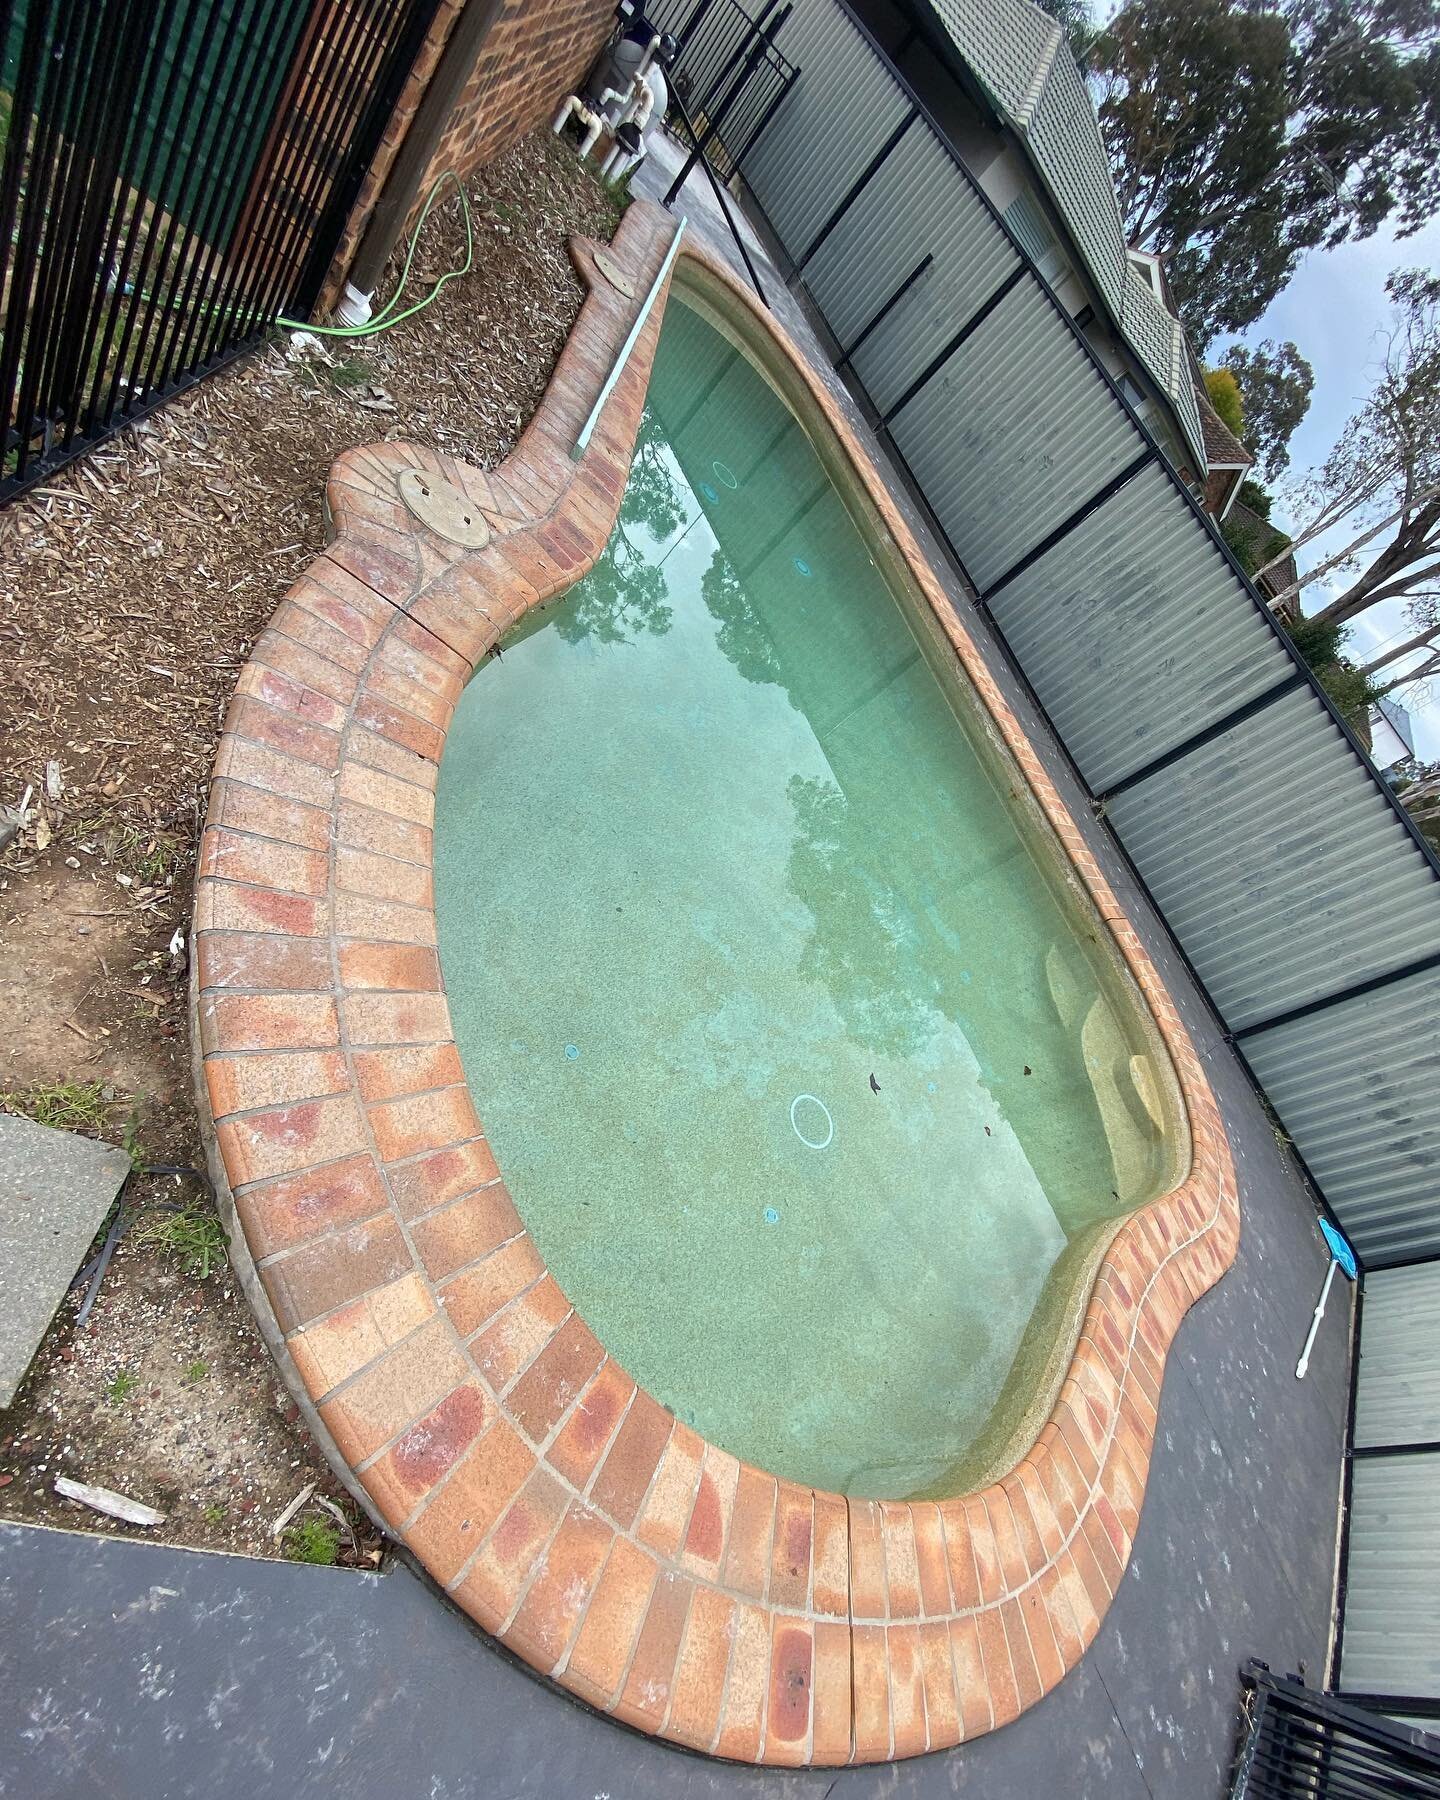 Need a temporary pool cover? Babich Constructions has you sorted 👍🏼

Many people in the process of building or renovating their homes require a temporary pool cover for safety and/or practical reasons - contact us via our website today to see how w